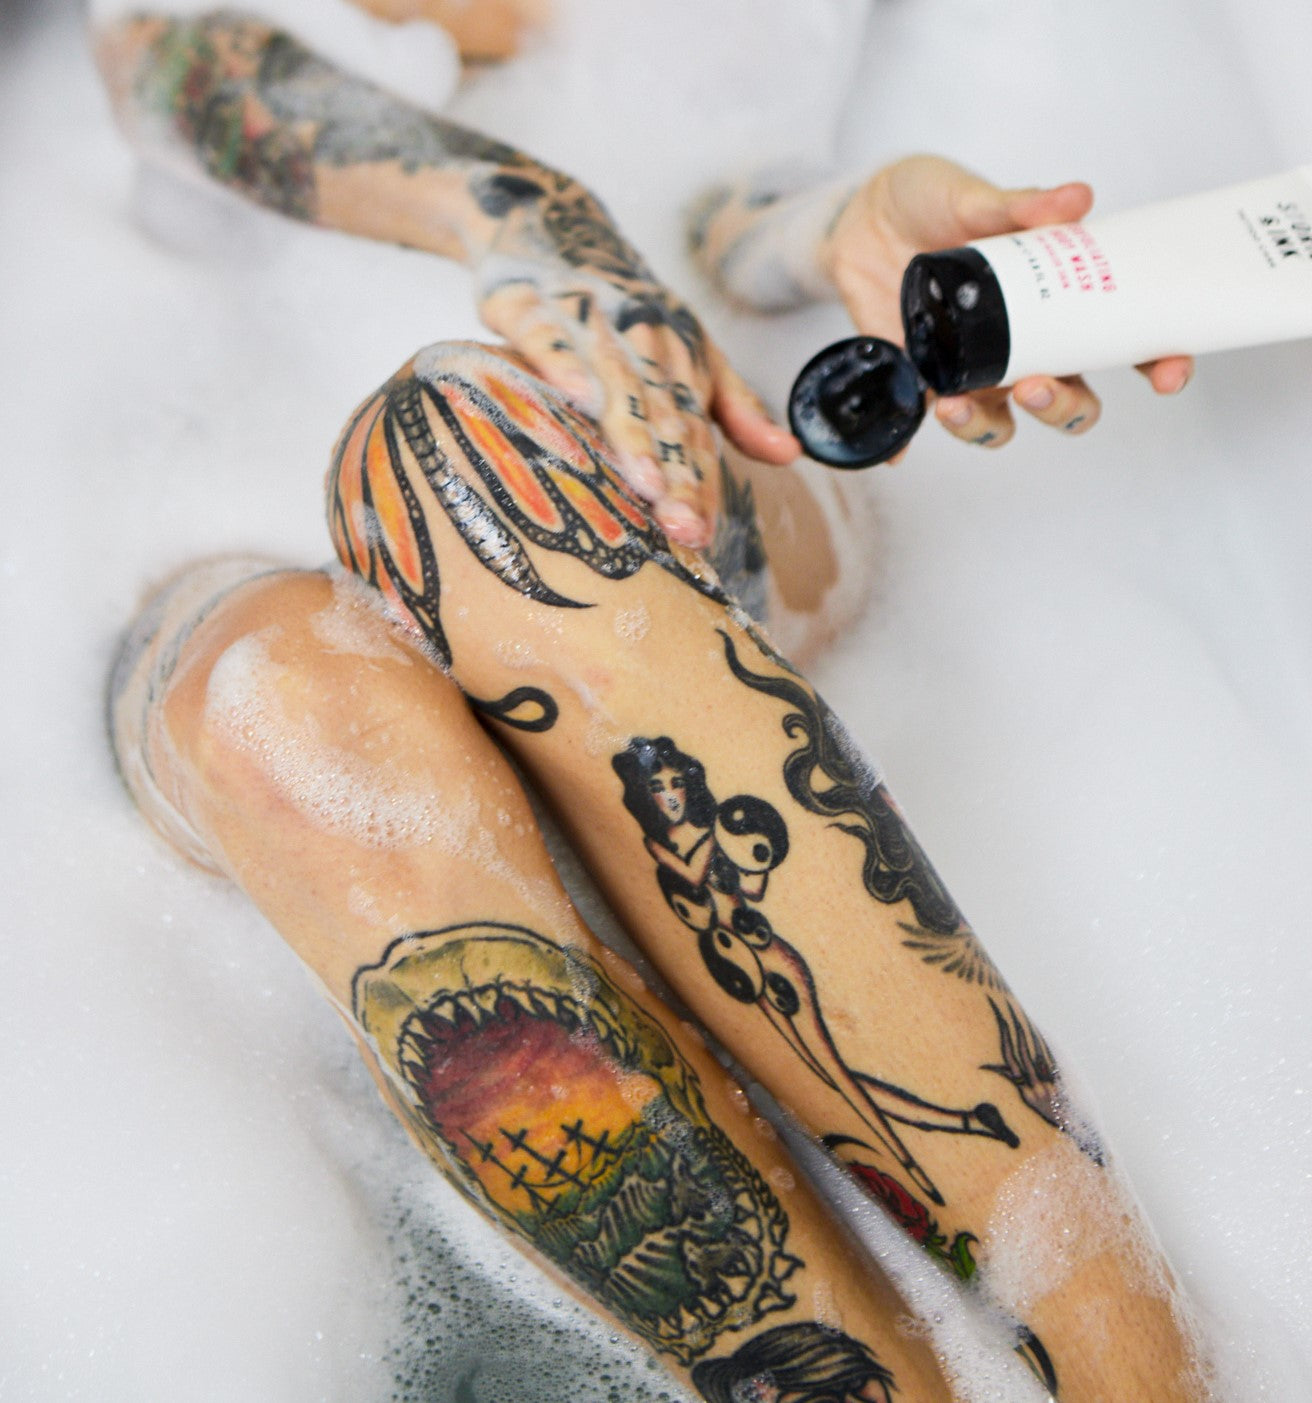 How long after getting tattoo can you take a bath